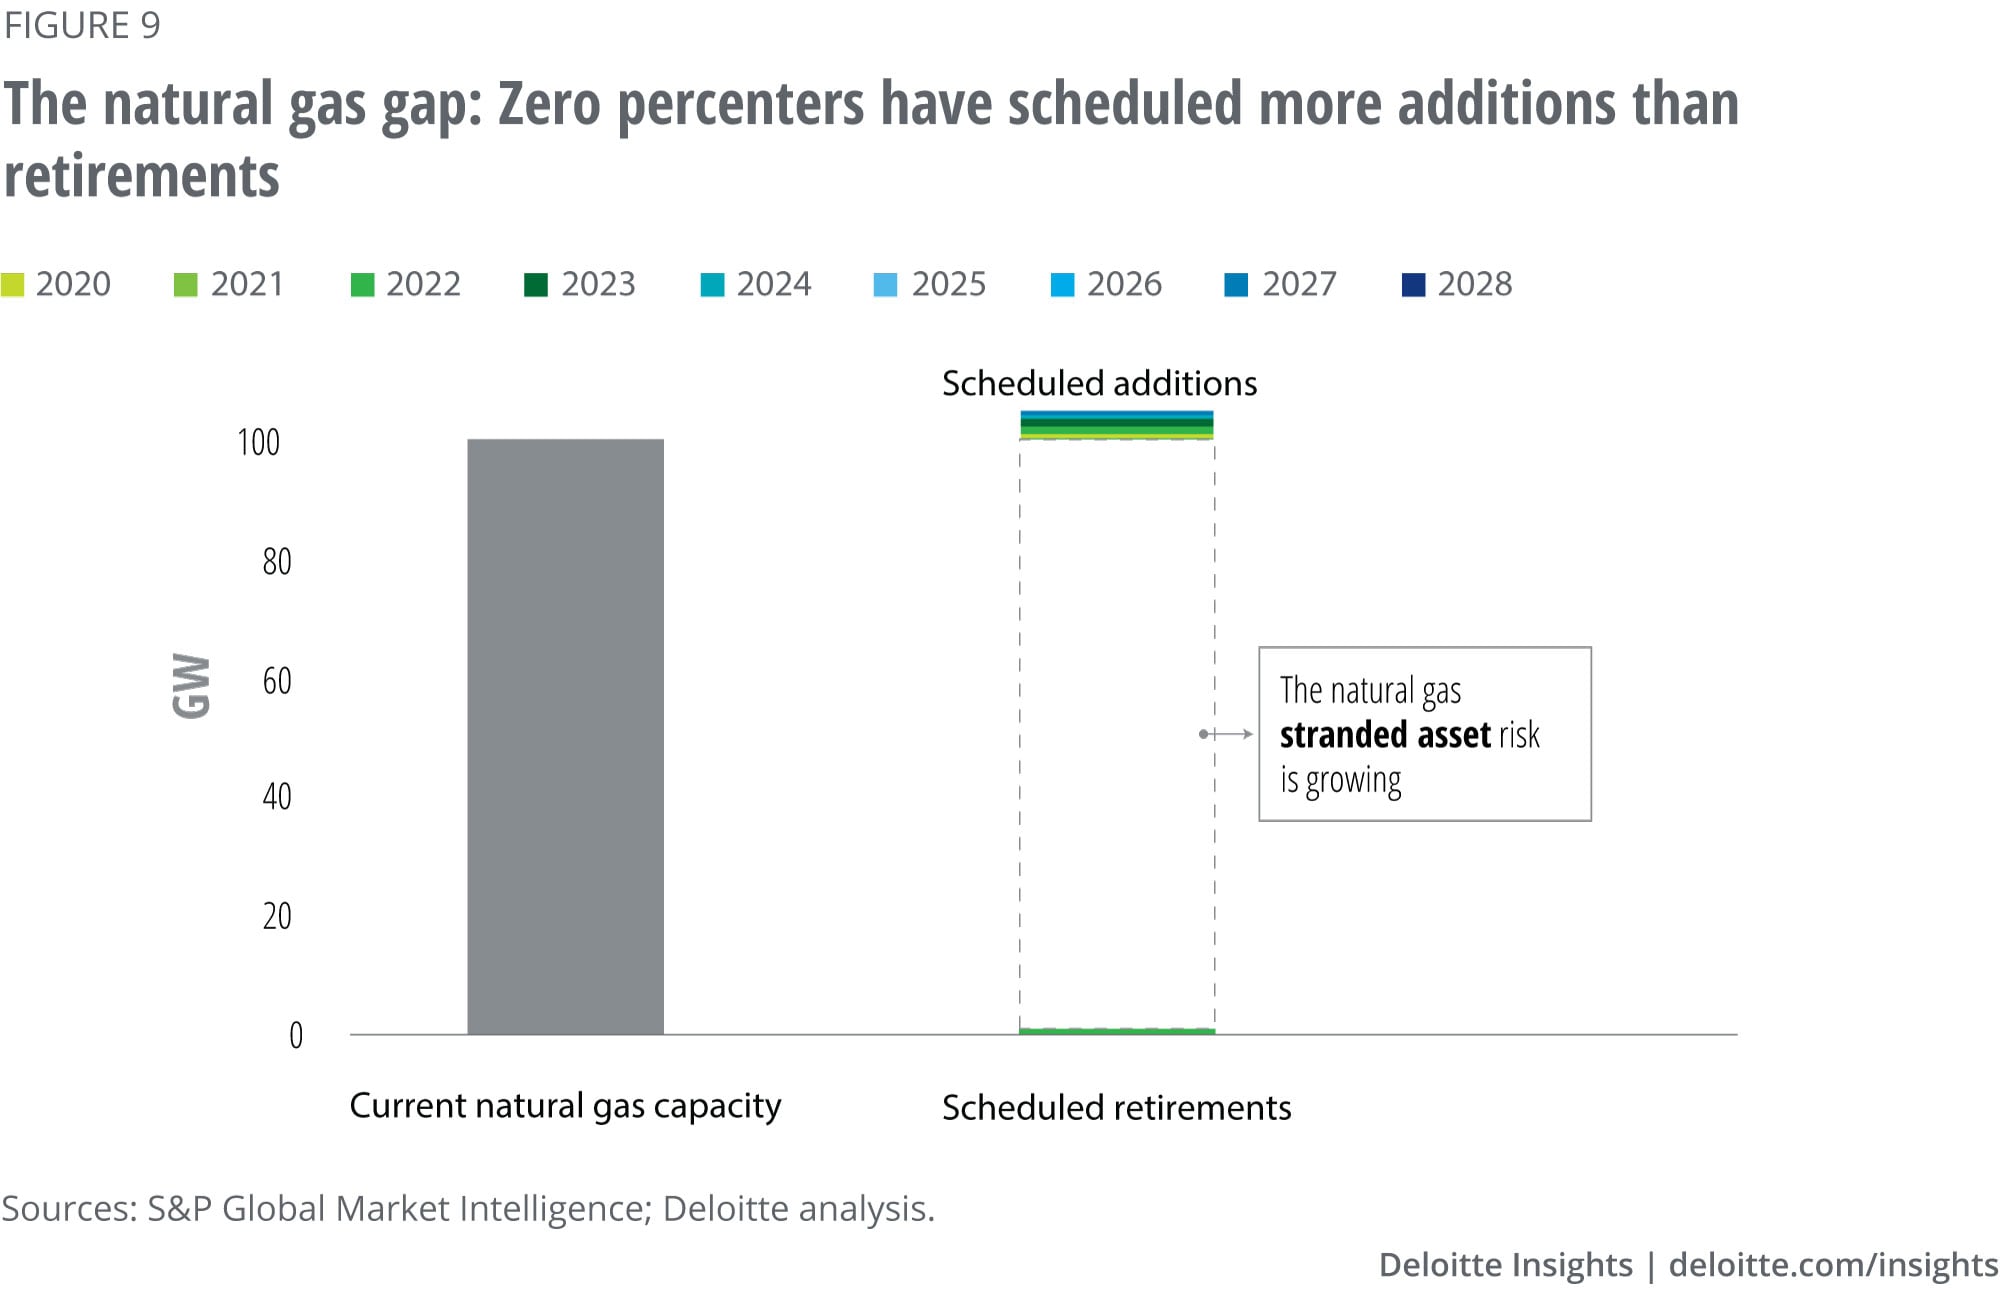 Natural gas capacity and scheduled retirements and additions for the 22 zero-percenter utilities